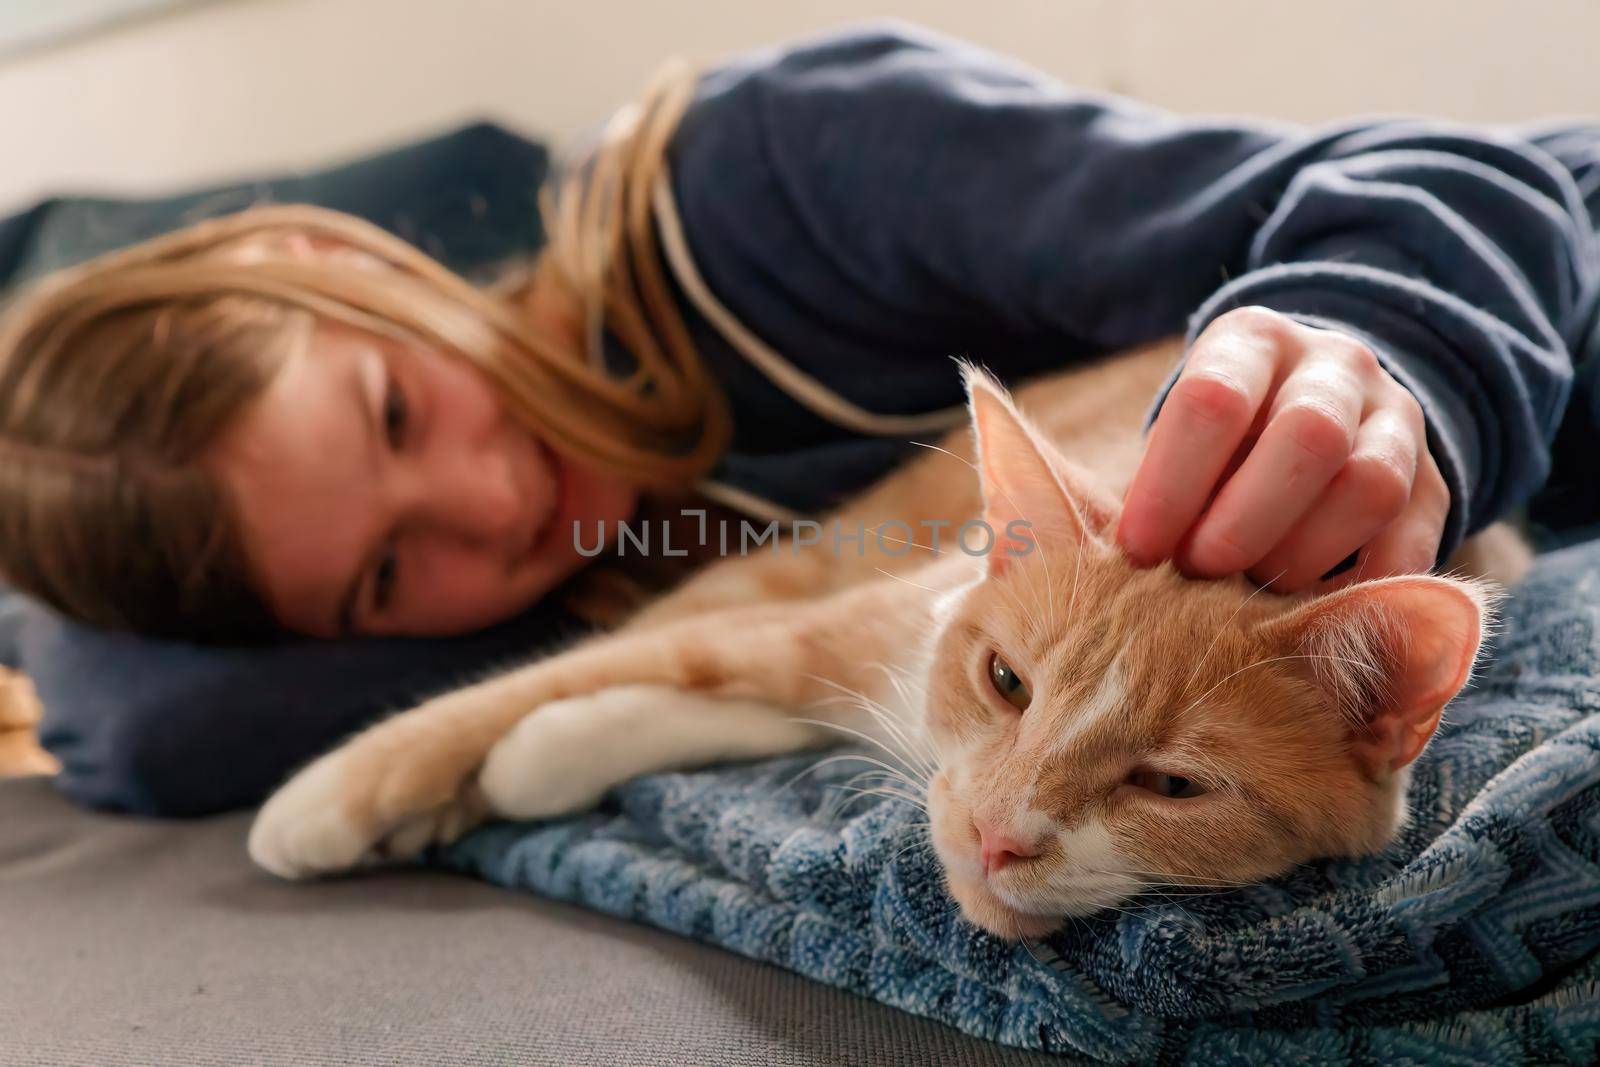 An Young Adolescent girl lying on a couch finds comfort by snuggling close to and petting her cat by markvandam